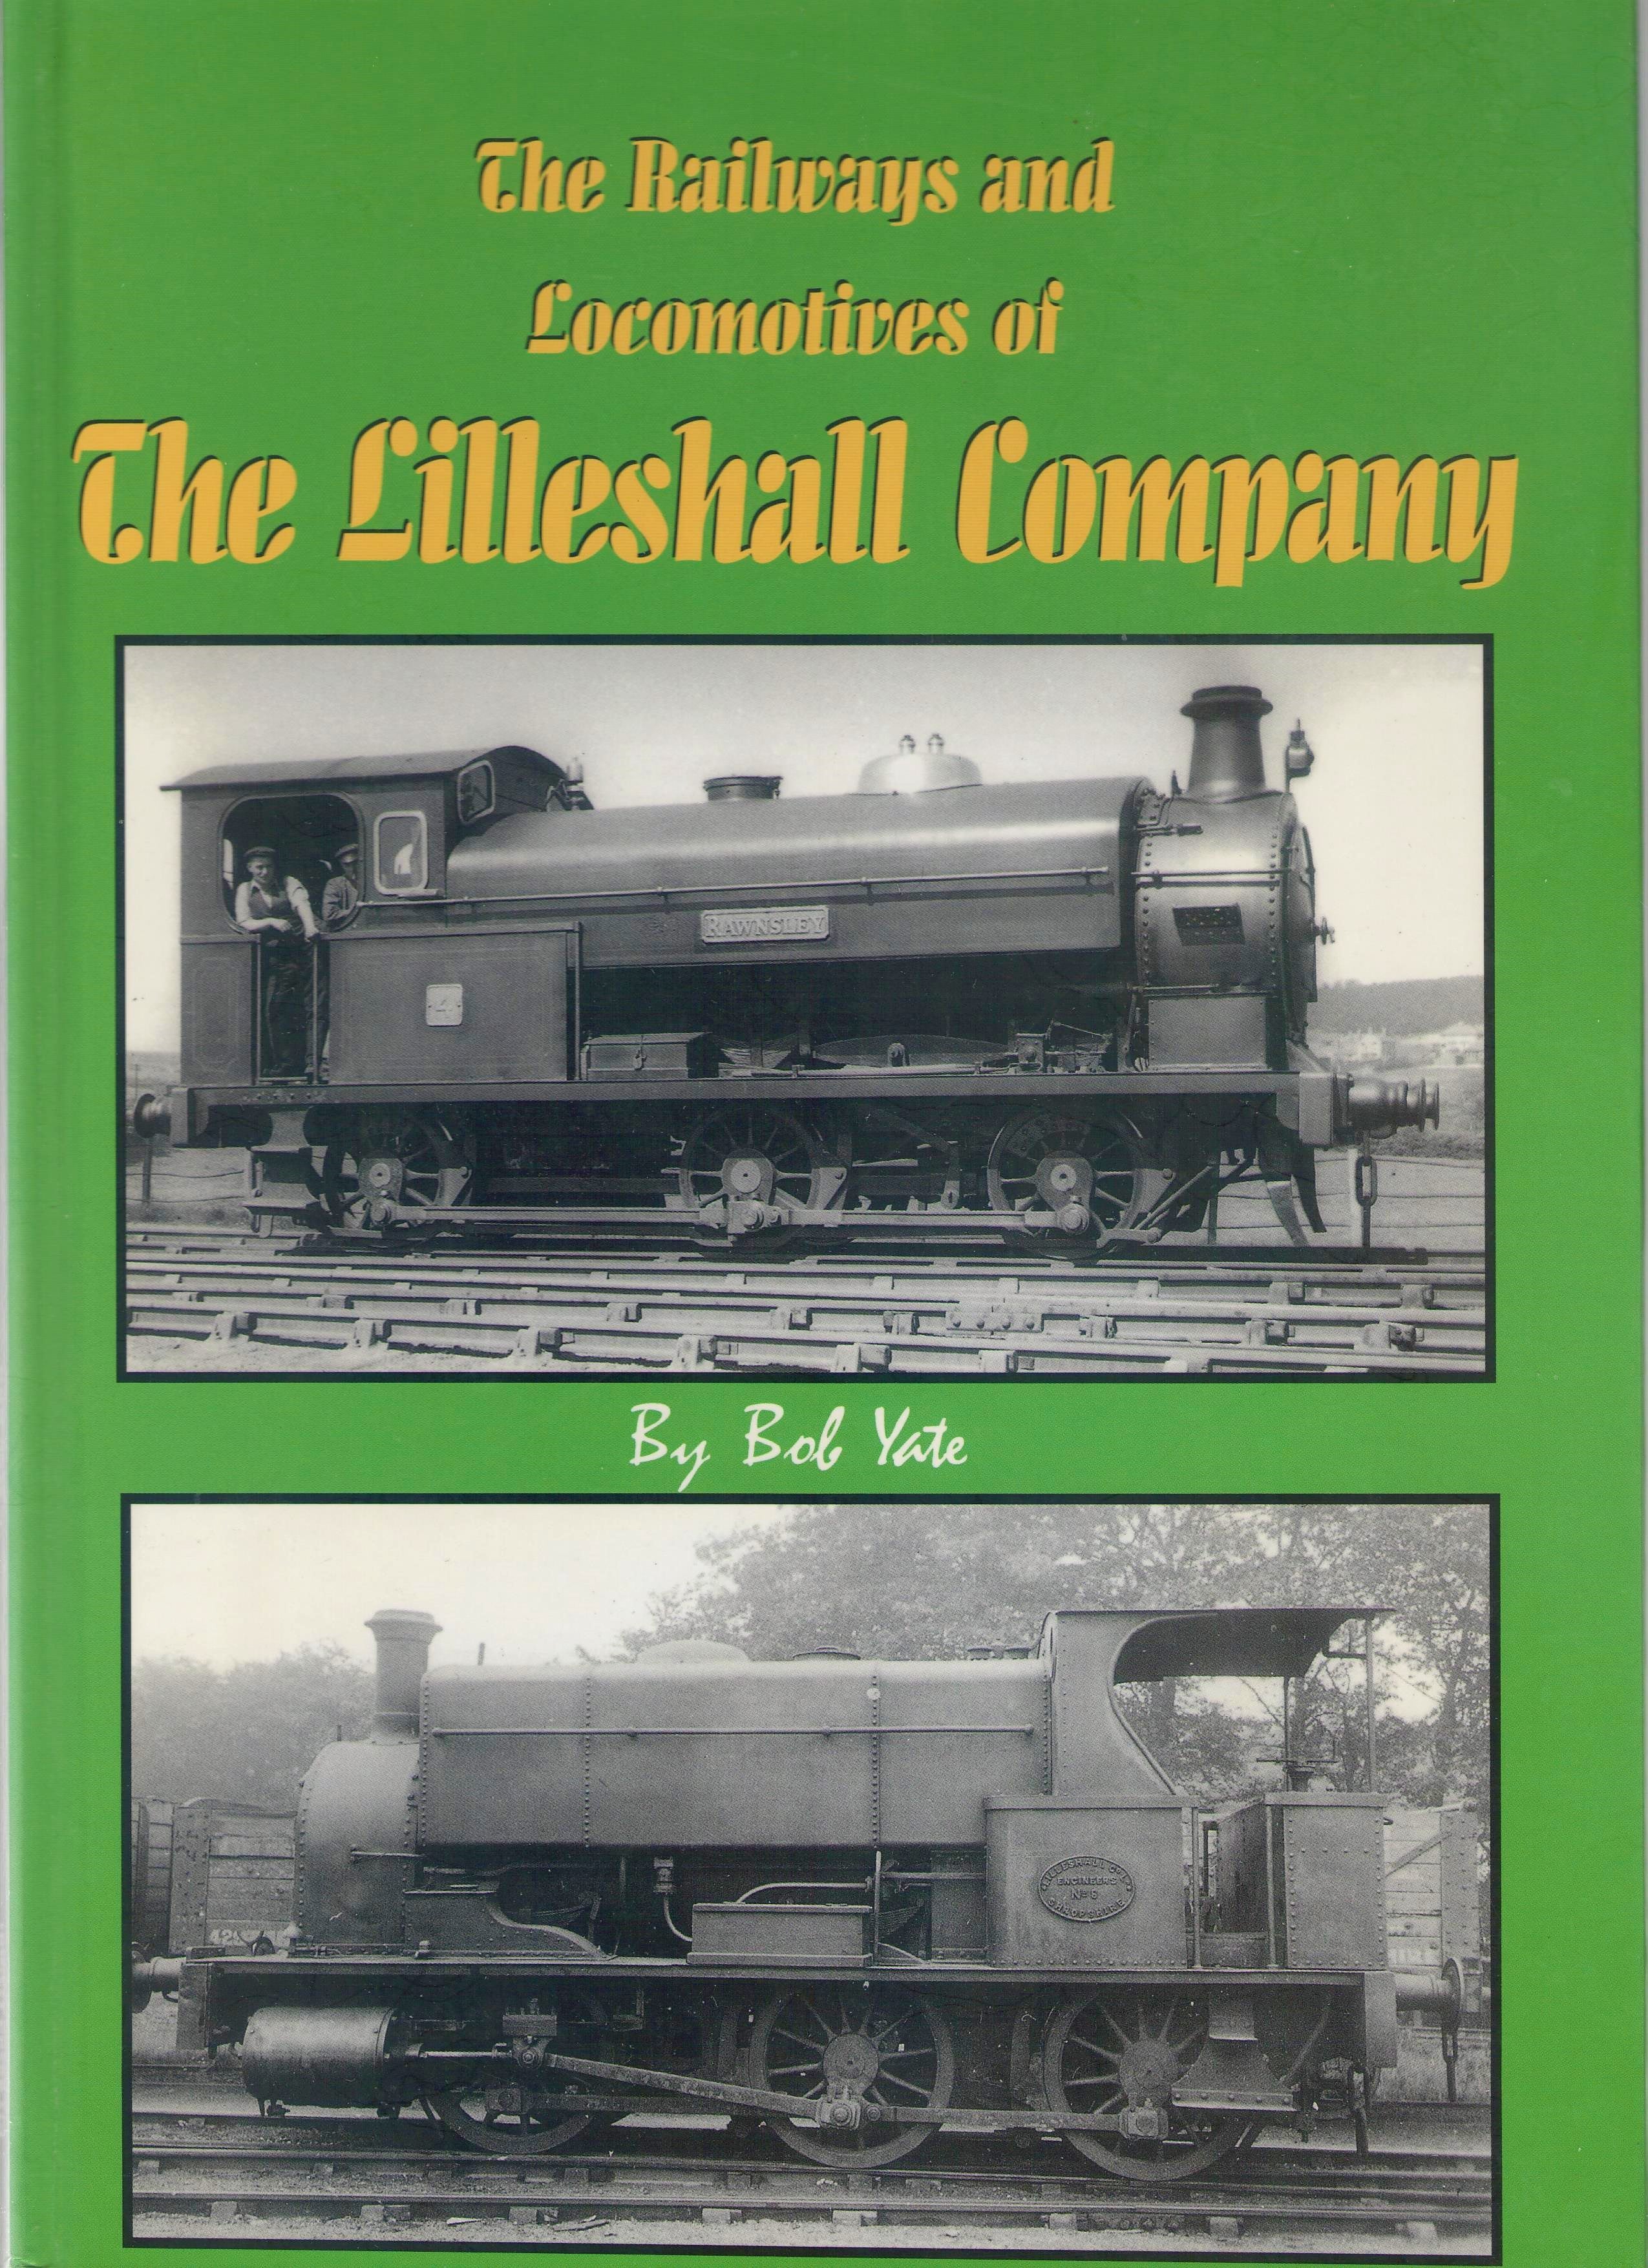 The Railways and Locomotives of The LILLESHALL COMPANY ALMOST SOLD-OUT BE QUICK